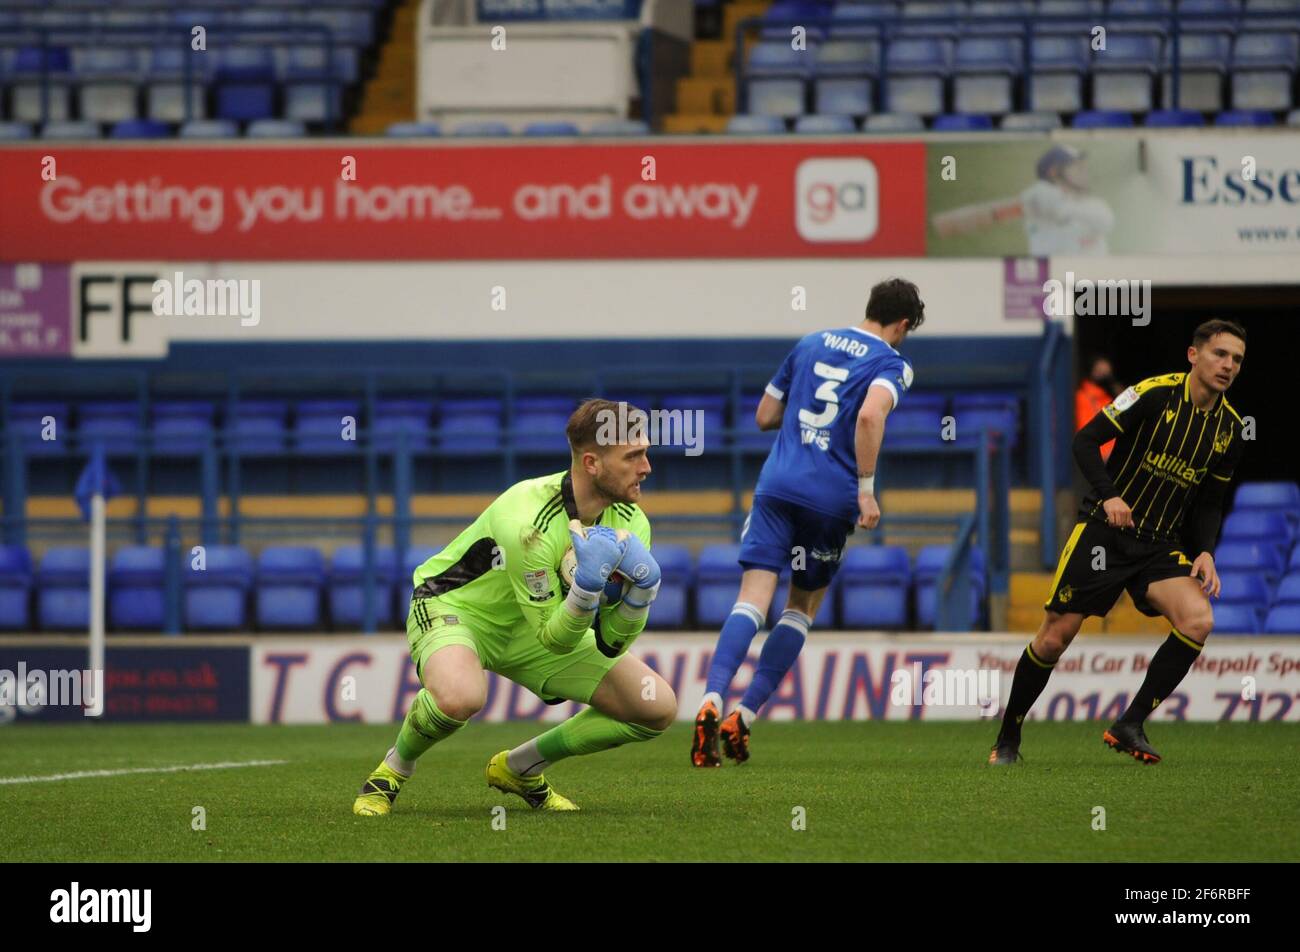 Ipswich, UK. 2nd Apr 2021. Ipswichs Tomas Holy collects the ball during the Sky Bet League 1 match between Ipswich Town and Bristol Rovers at Portman Road, Ipswich on Friday 2nd April 2021. (Credit: Ben Pooley | MI News) Credit: MI News & Sport /Alamy Live News Stock Photo